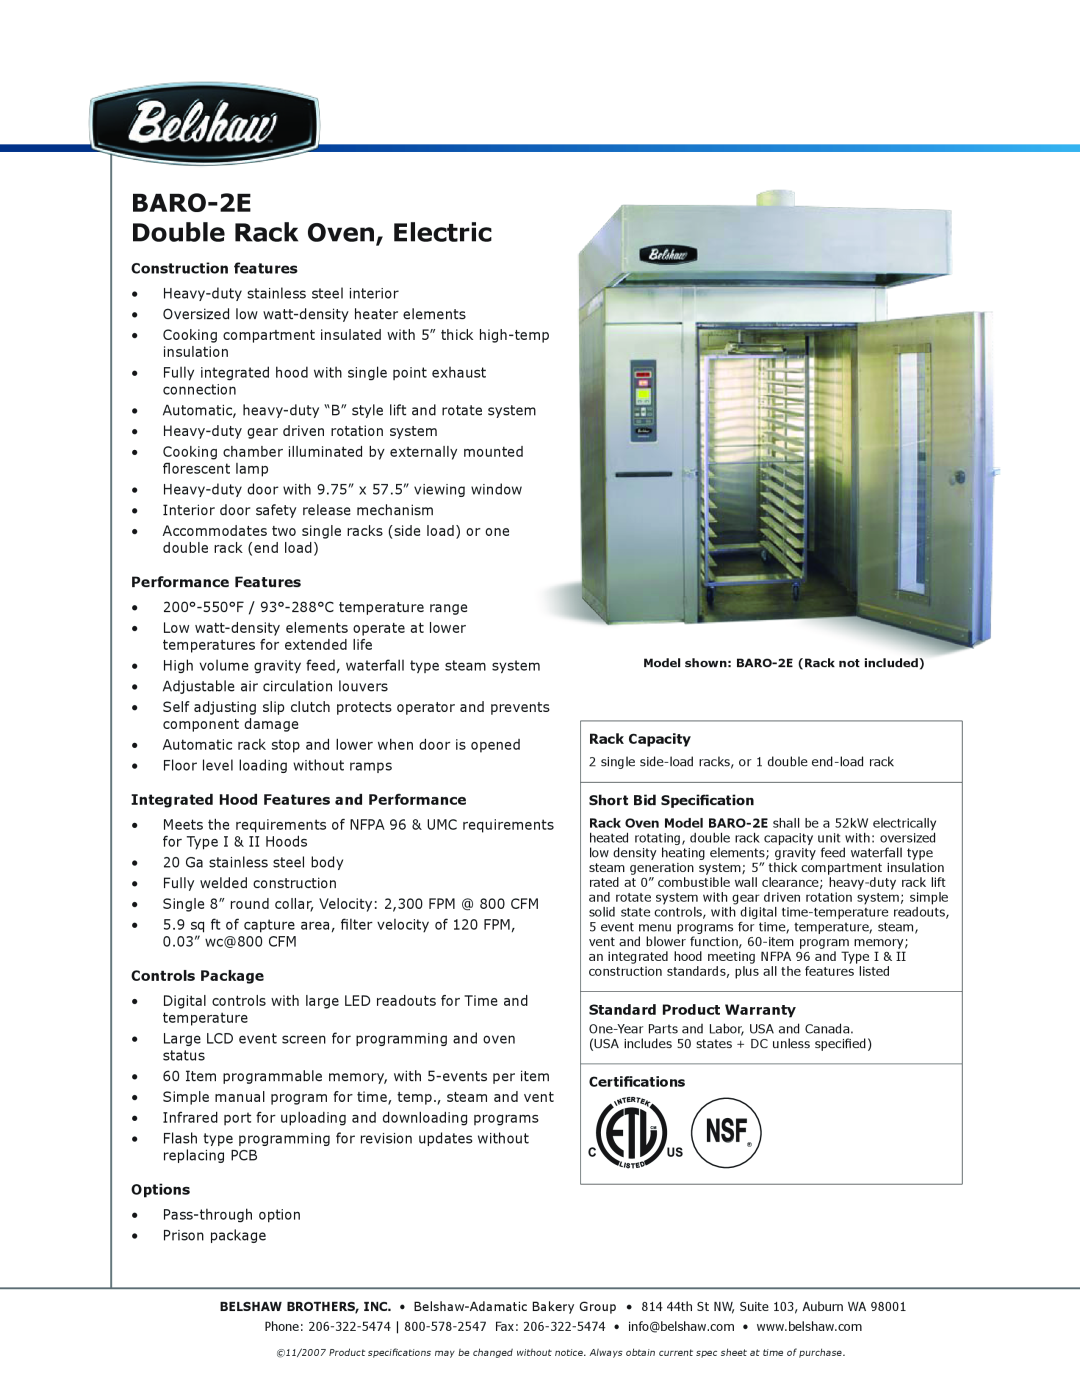 Belshaw Brothers BARO-2E warranty Construction features, Performance Features, Integrated Hood Features and Performance 